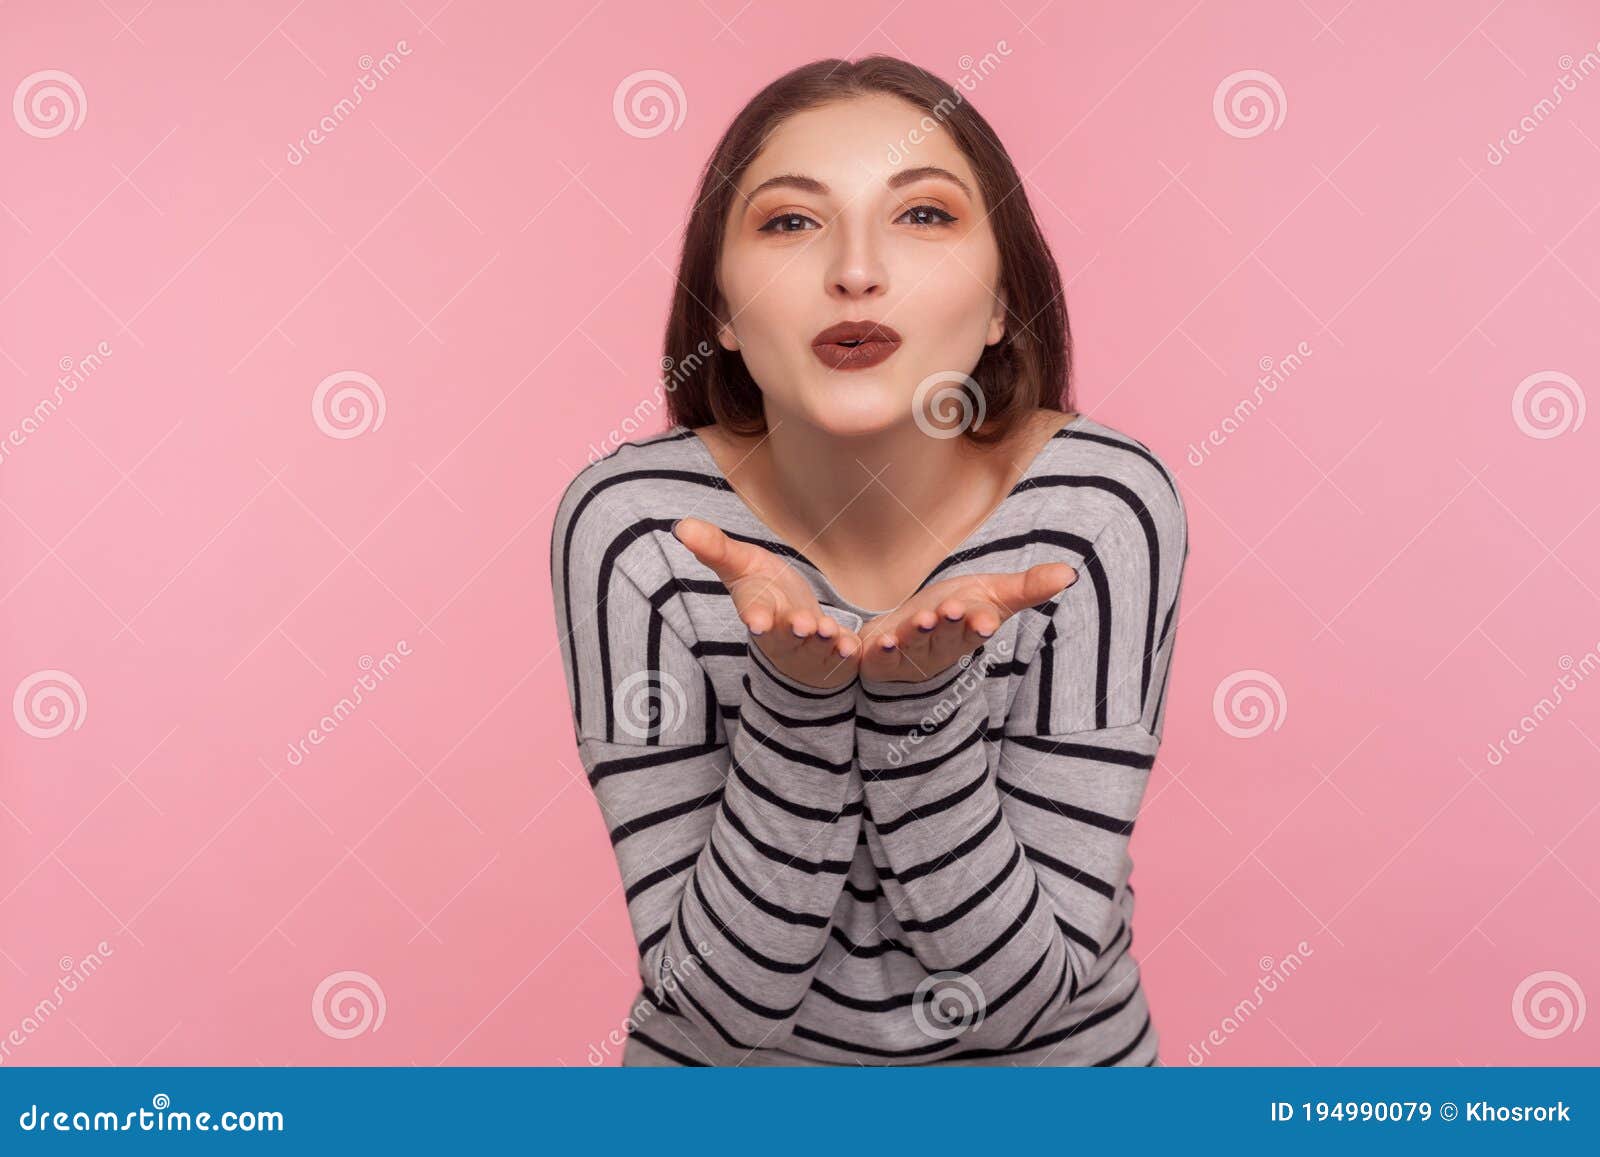 love you! portrait of sensual attractive woman in striped sweatshirt sending air kiss over palms, expressing fondness